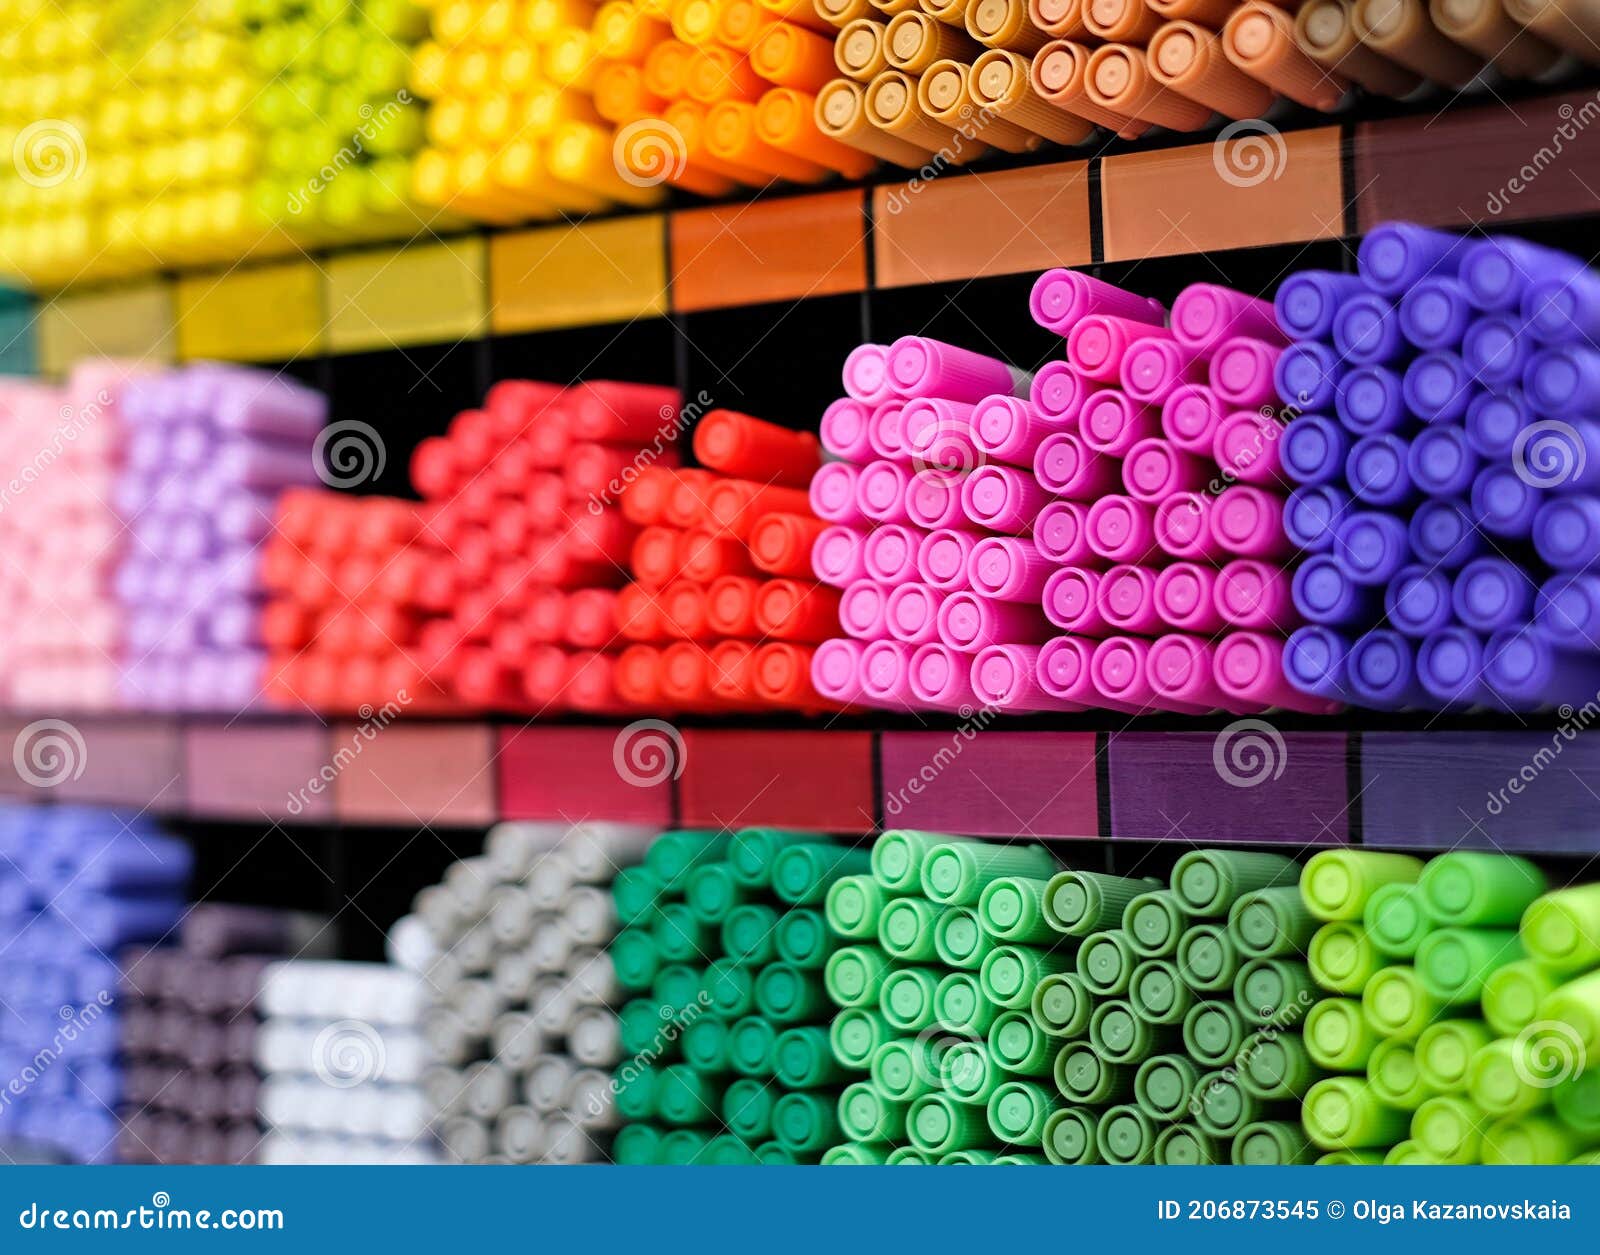 Colorful pens on shelf in stationery store Stock Photo by ©crPrin 167053992